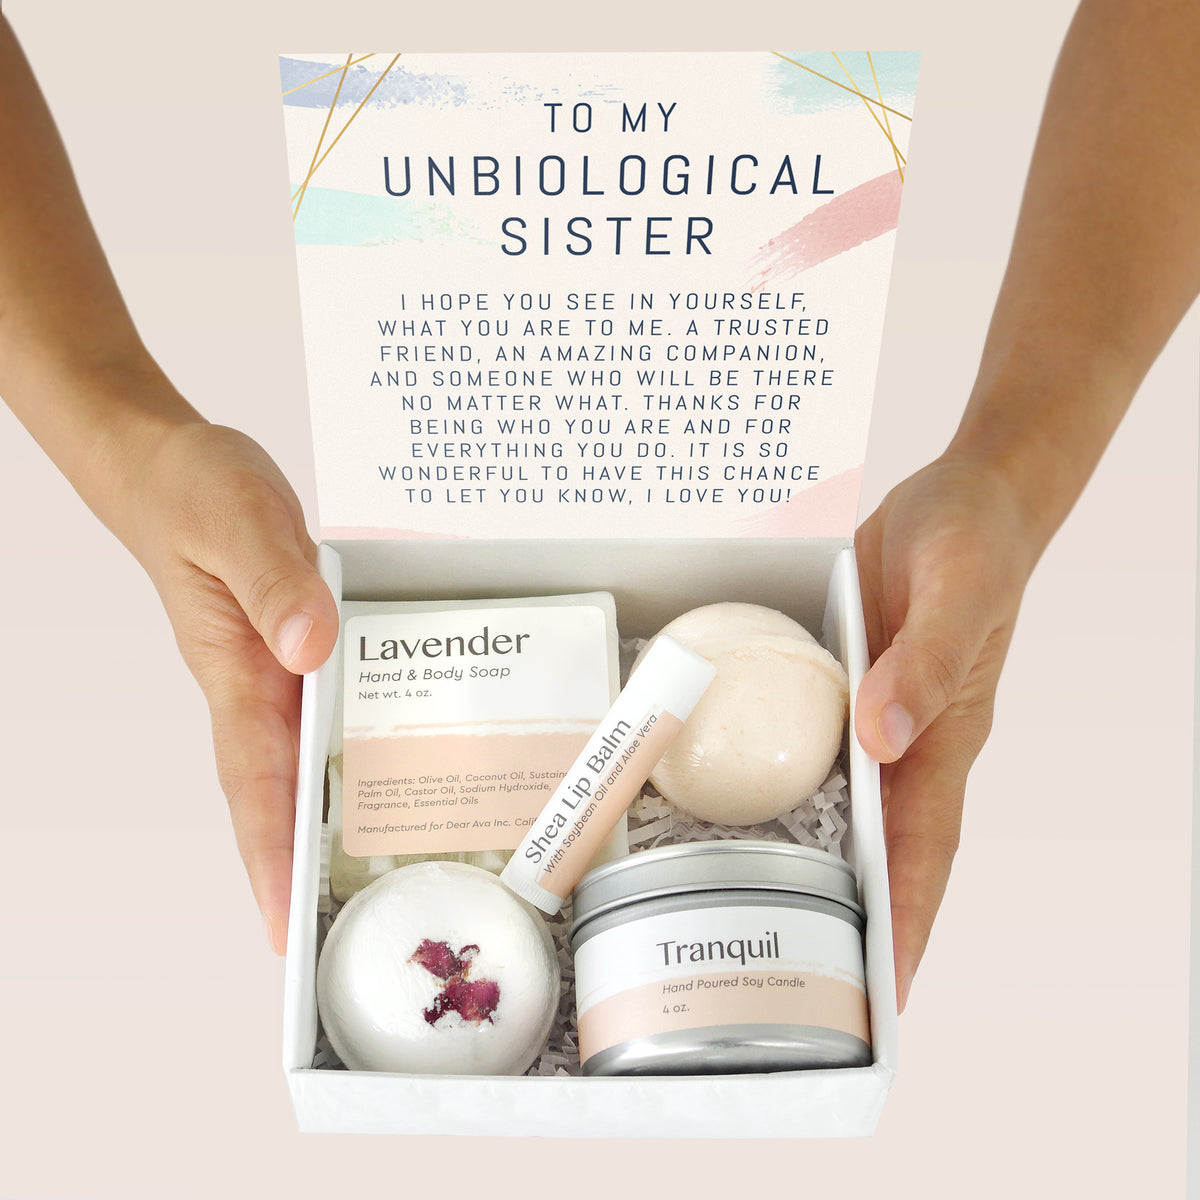 Unbiological Sisters Pearl Necklace Gift Box Set